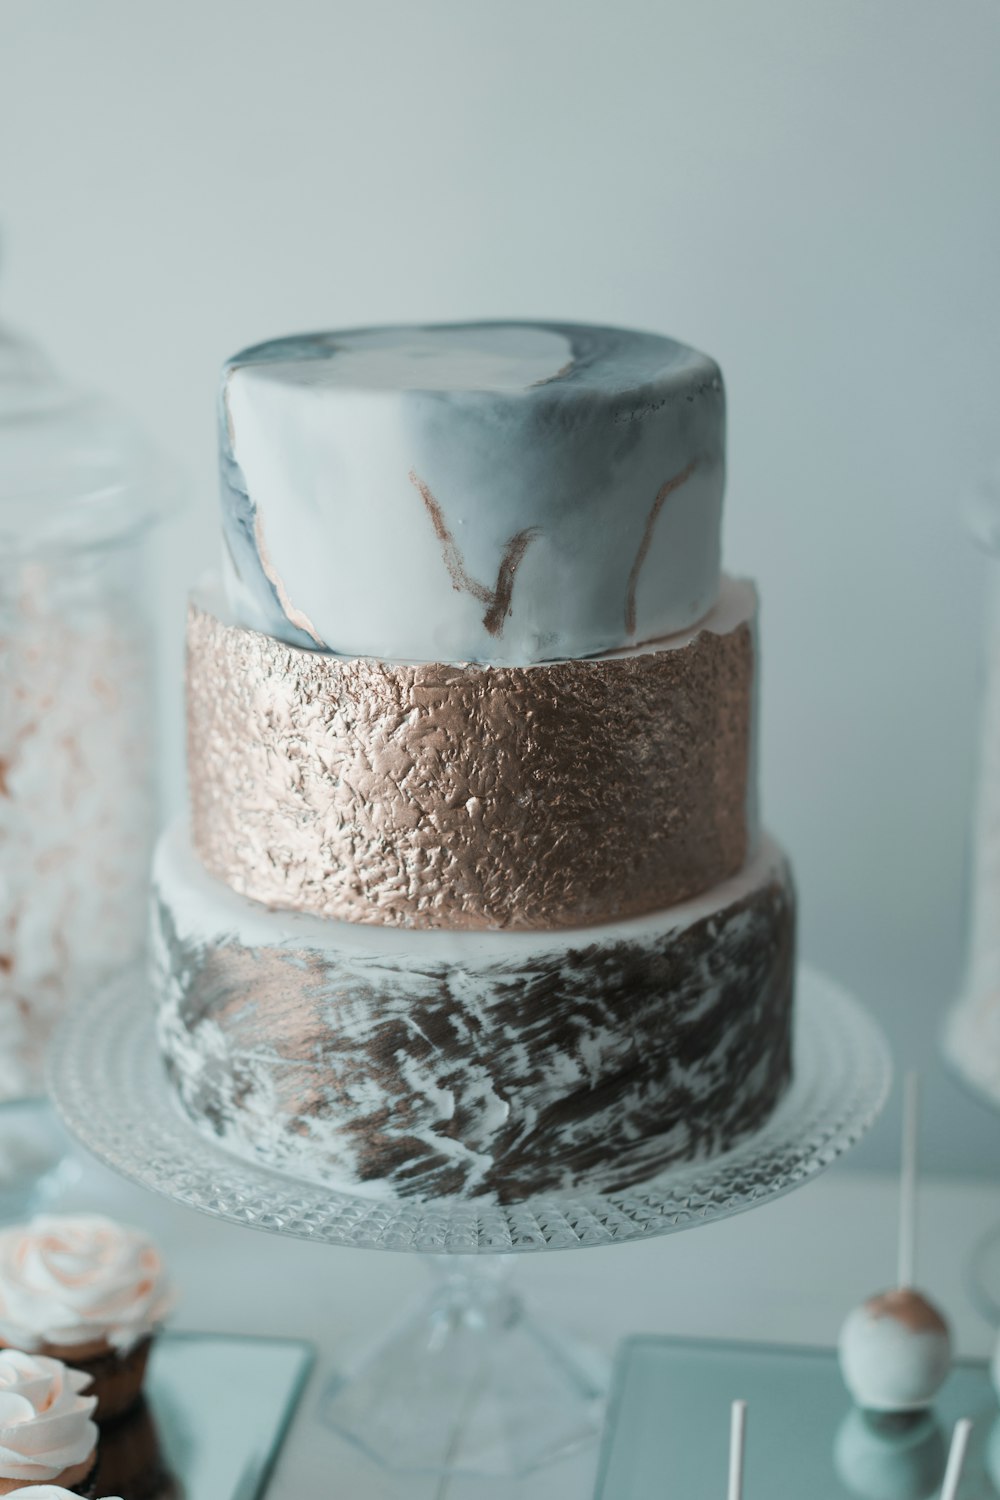 brown and grey cake close-up photography